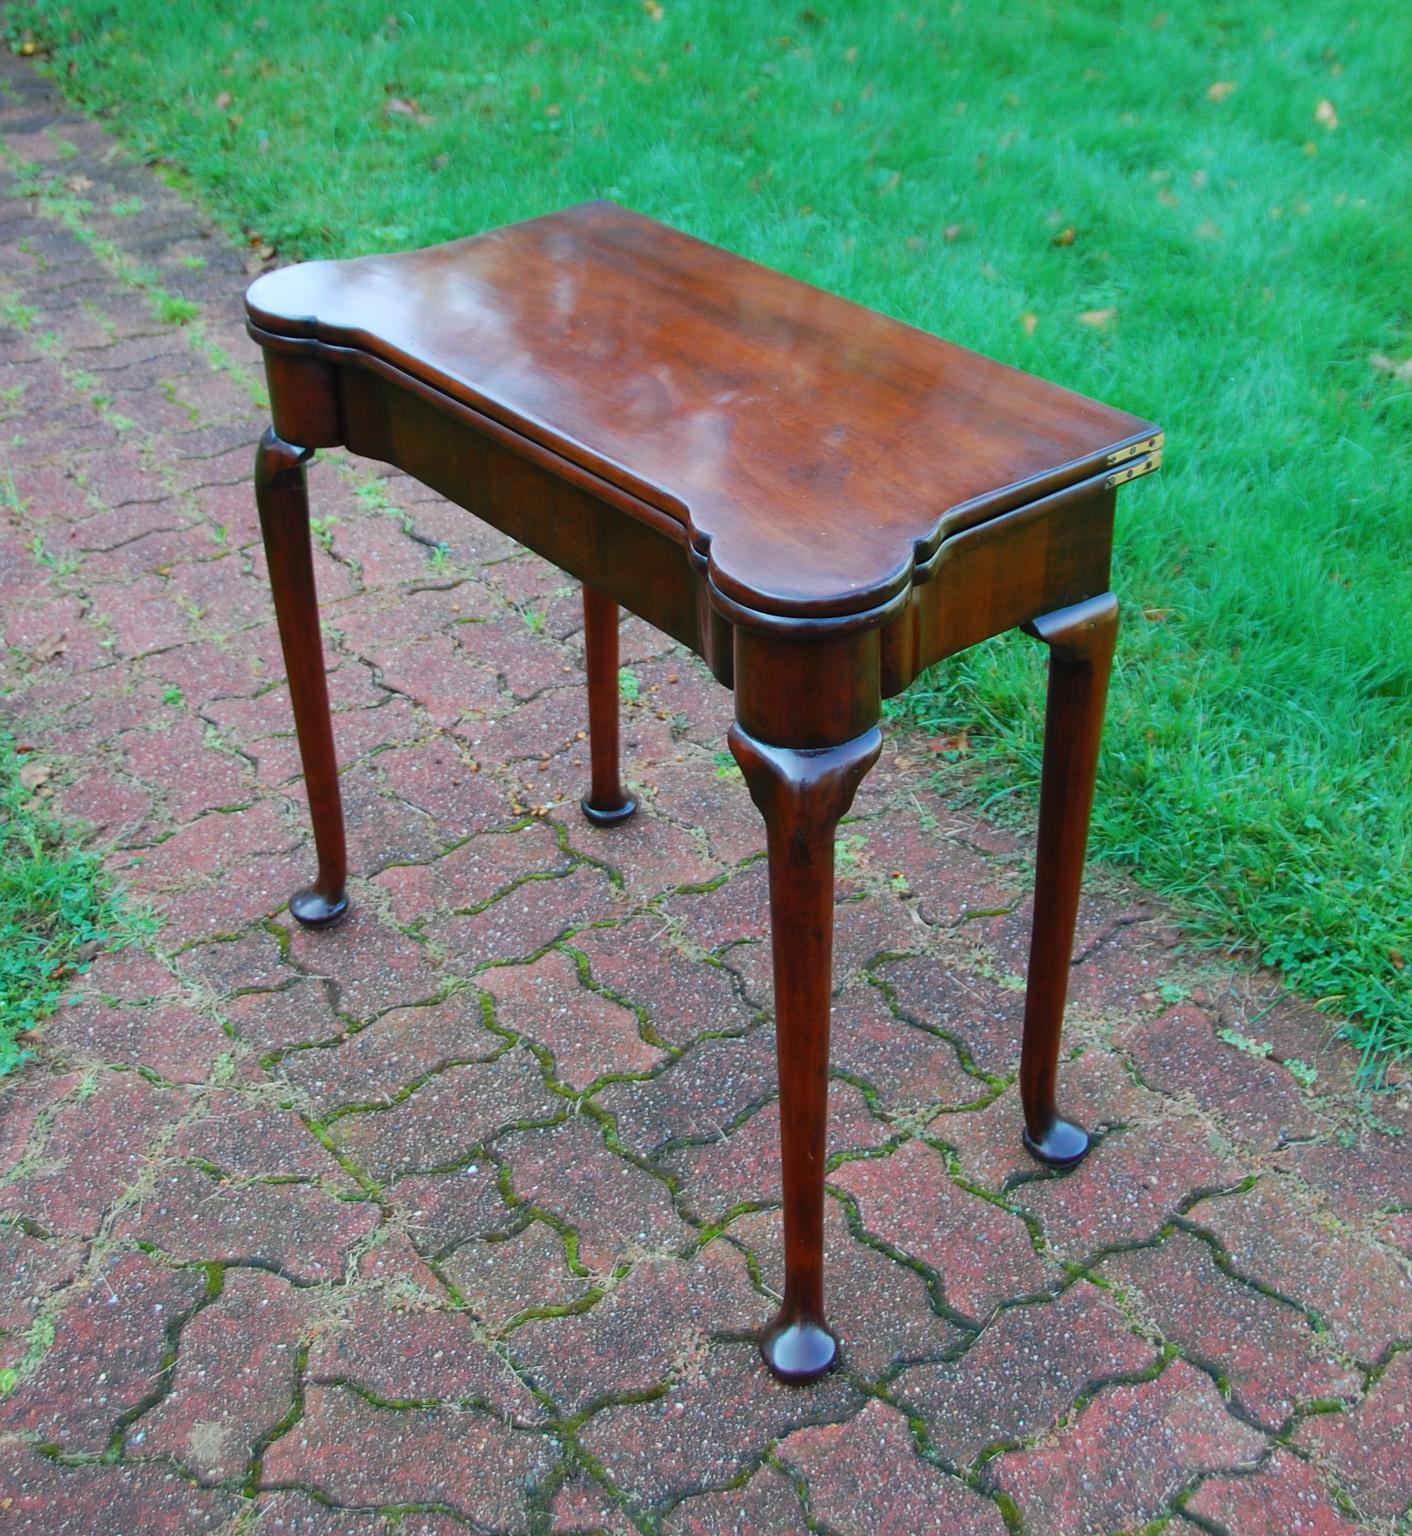 English George II mahogany foldover card table with cabriole legs, pad feet, guinea wells and candleholders. When the table is opened, the green baize playing surface is revealed. Oval guinea wells for each player, along with round corner mahogany